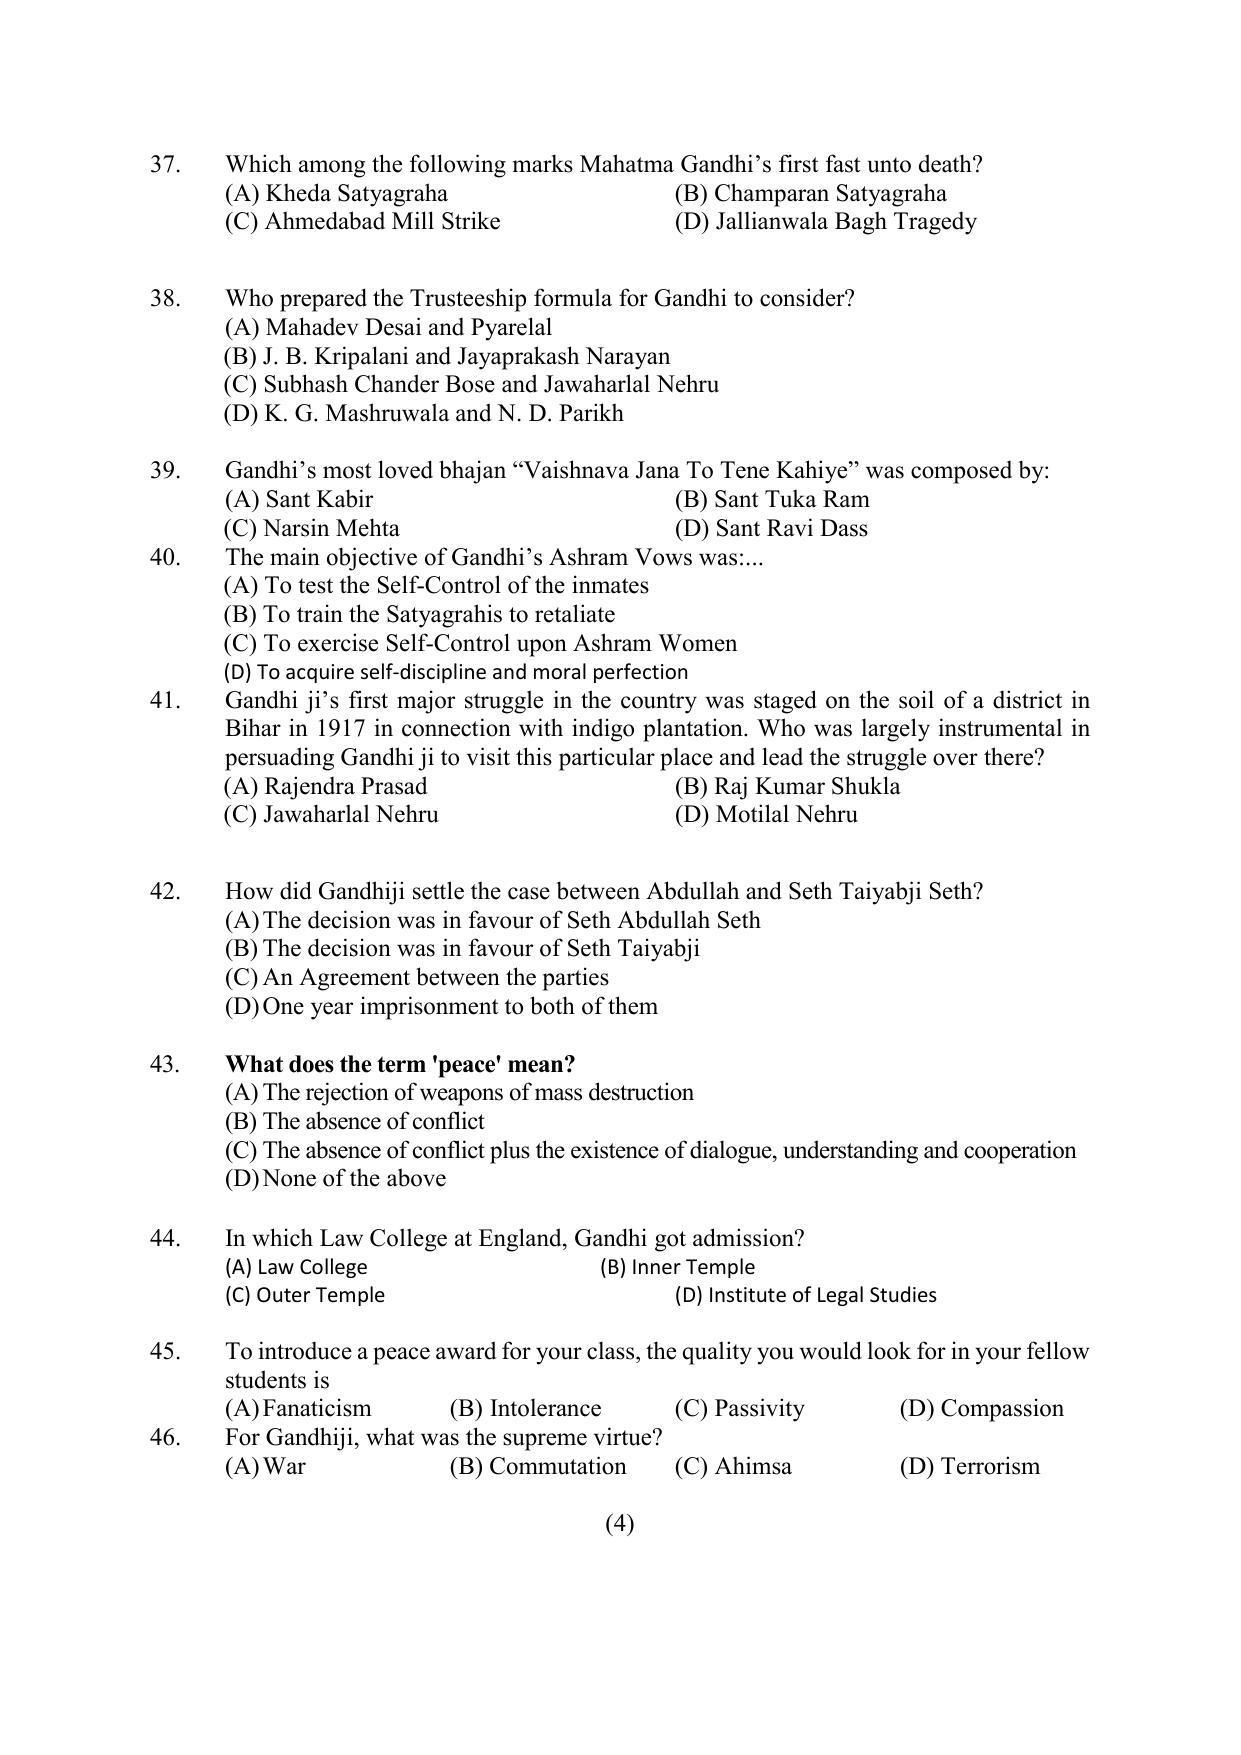 PU MPET Ancient Indian History & Archeology 2022 Question Papers - Page 16